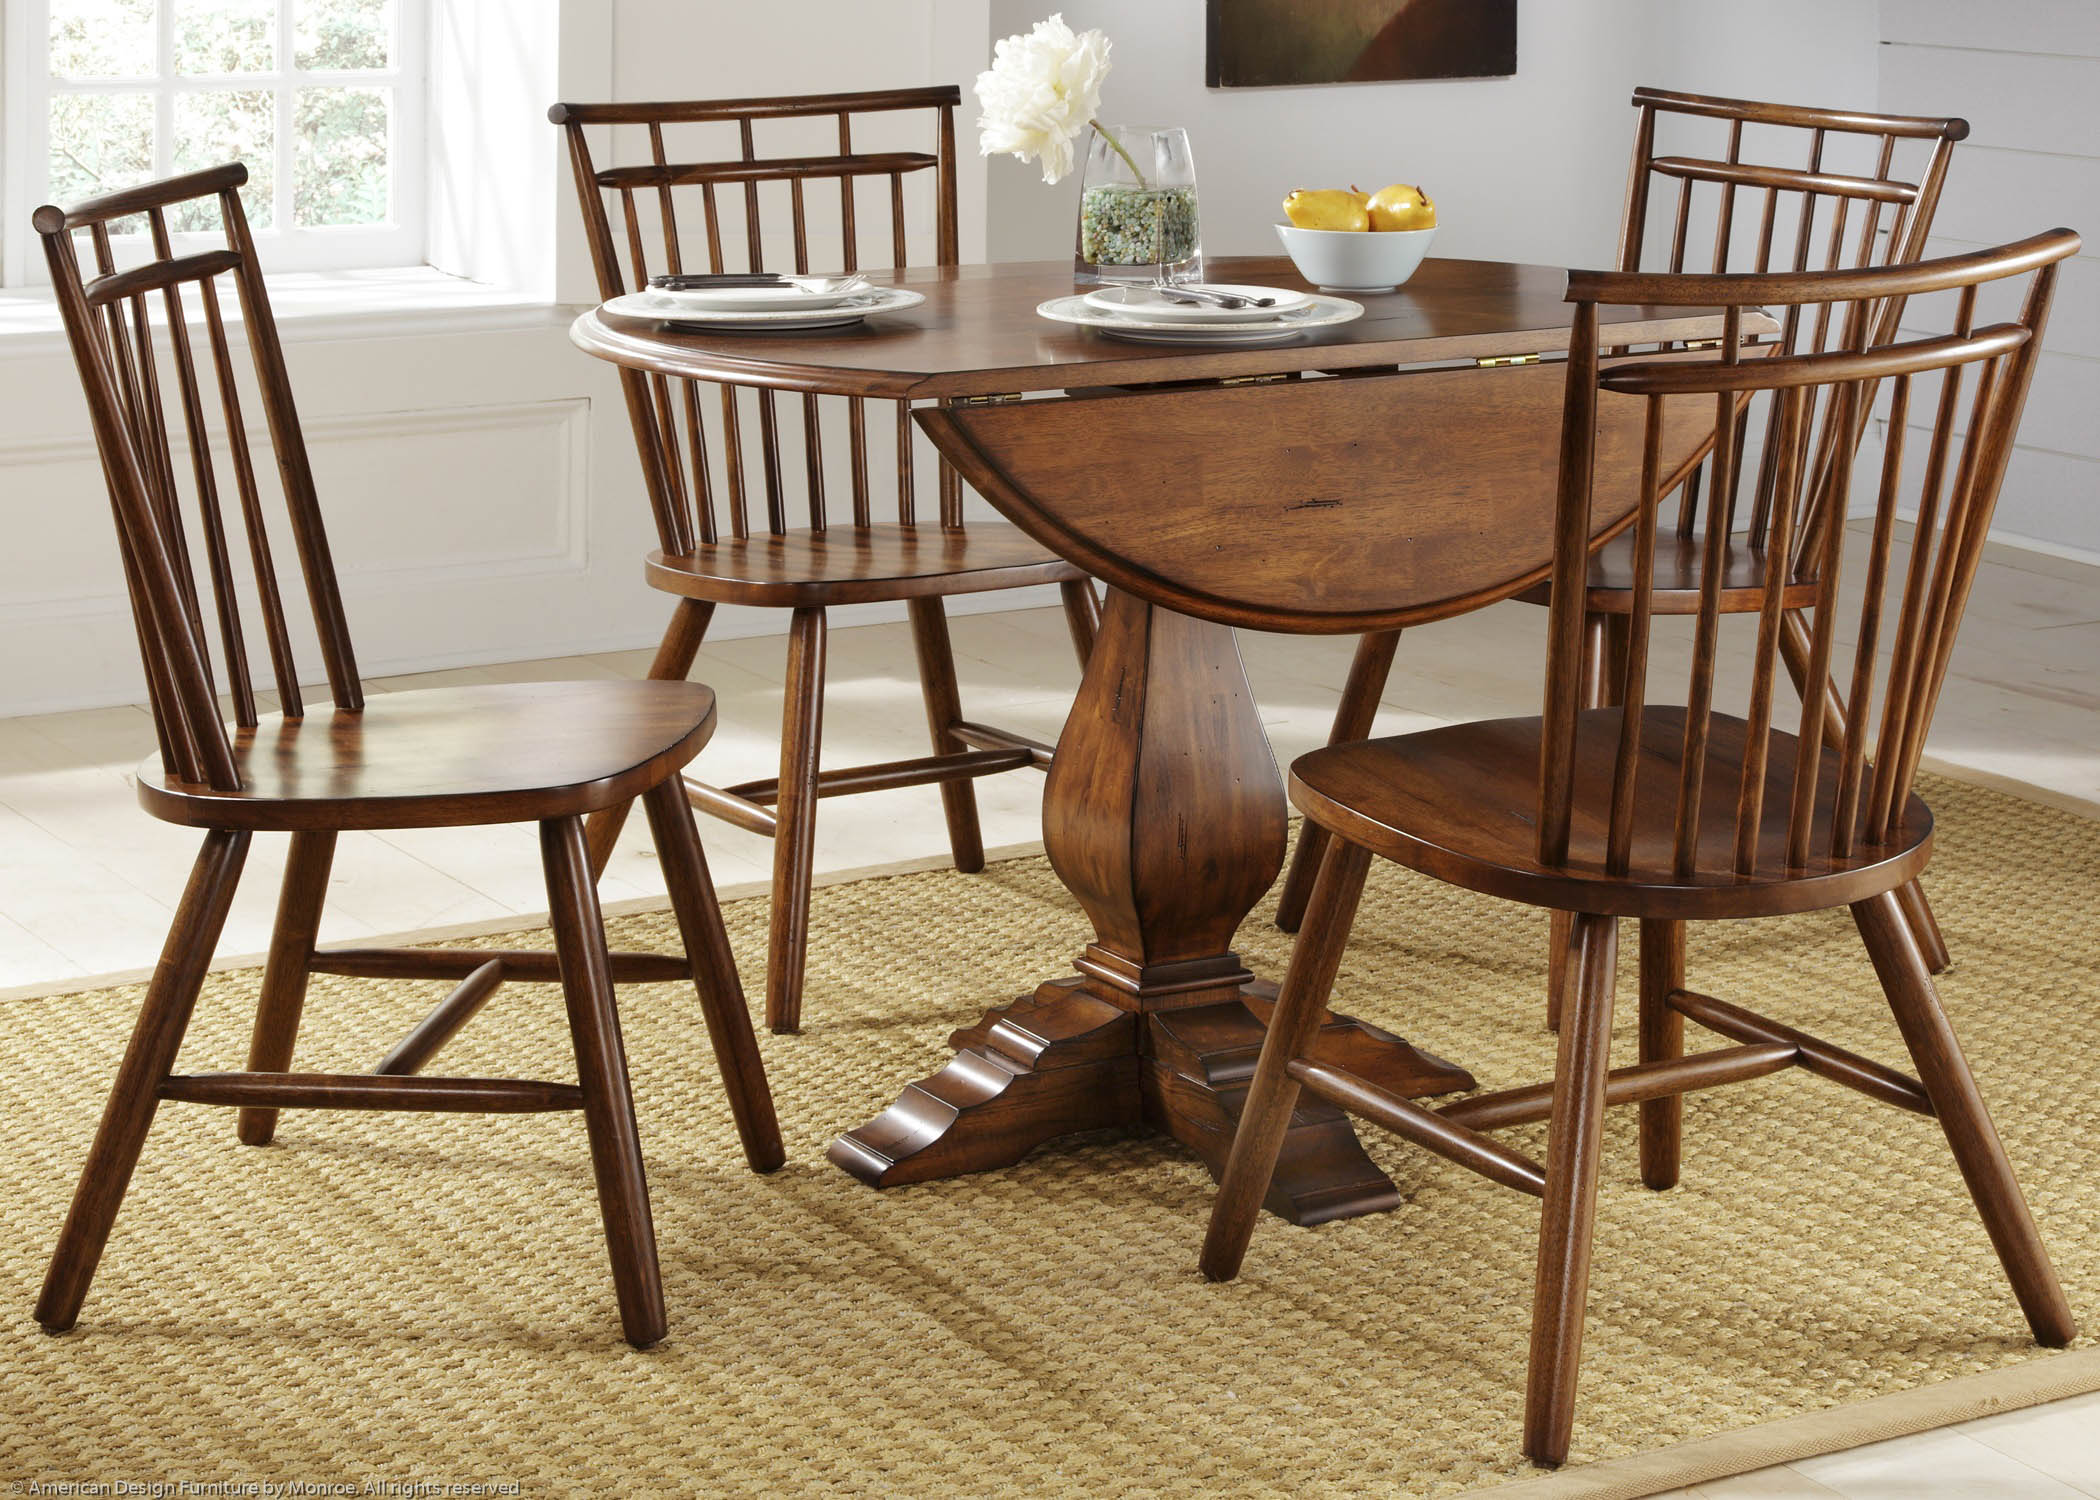 Nantucket Casual Table Pic 1 (Heading Drop Leaf Pedestal Table)